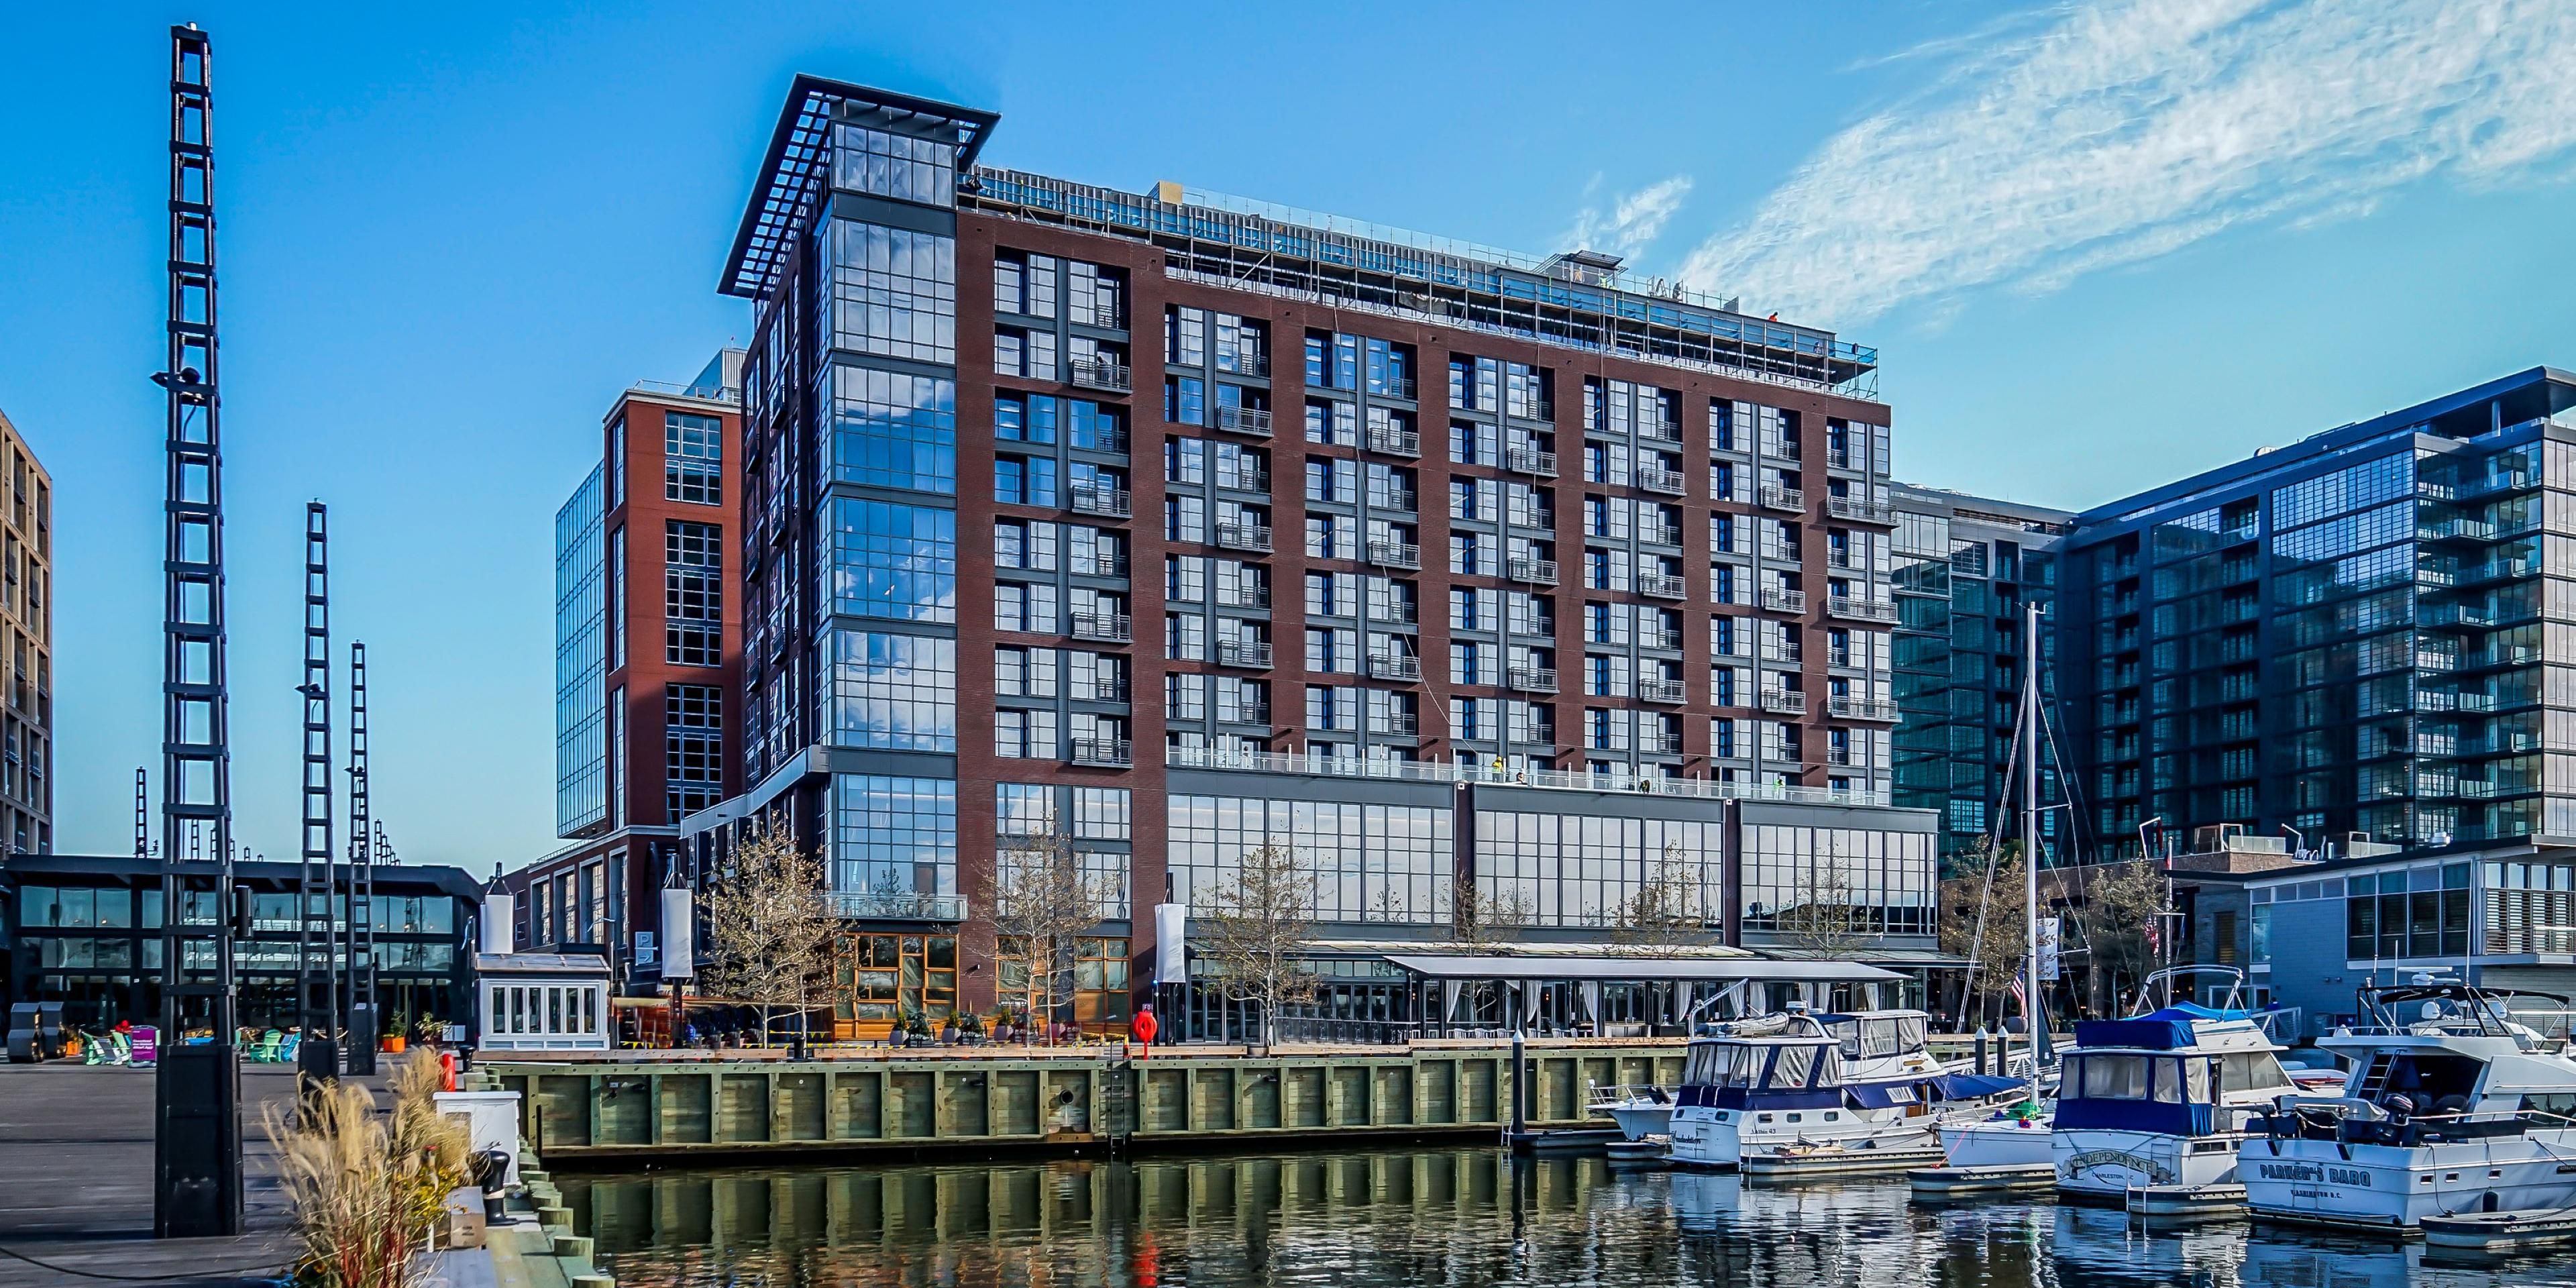 Our conveniently located hotel overlooks the Potomac River within The Wharf neighborhood, D.C.’s acclaimed waterfront entertainment and residential oasis. Standout features include a spa, outdoor pool, restaurants and fitness center. We are also steps from major museums and historical monuments, and next to the acclaimed music venue, the Anthem.